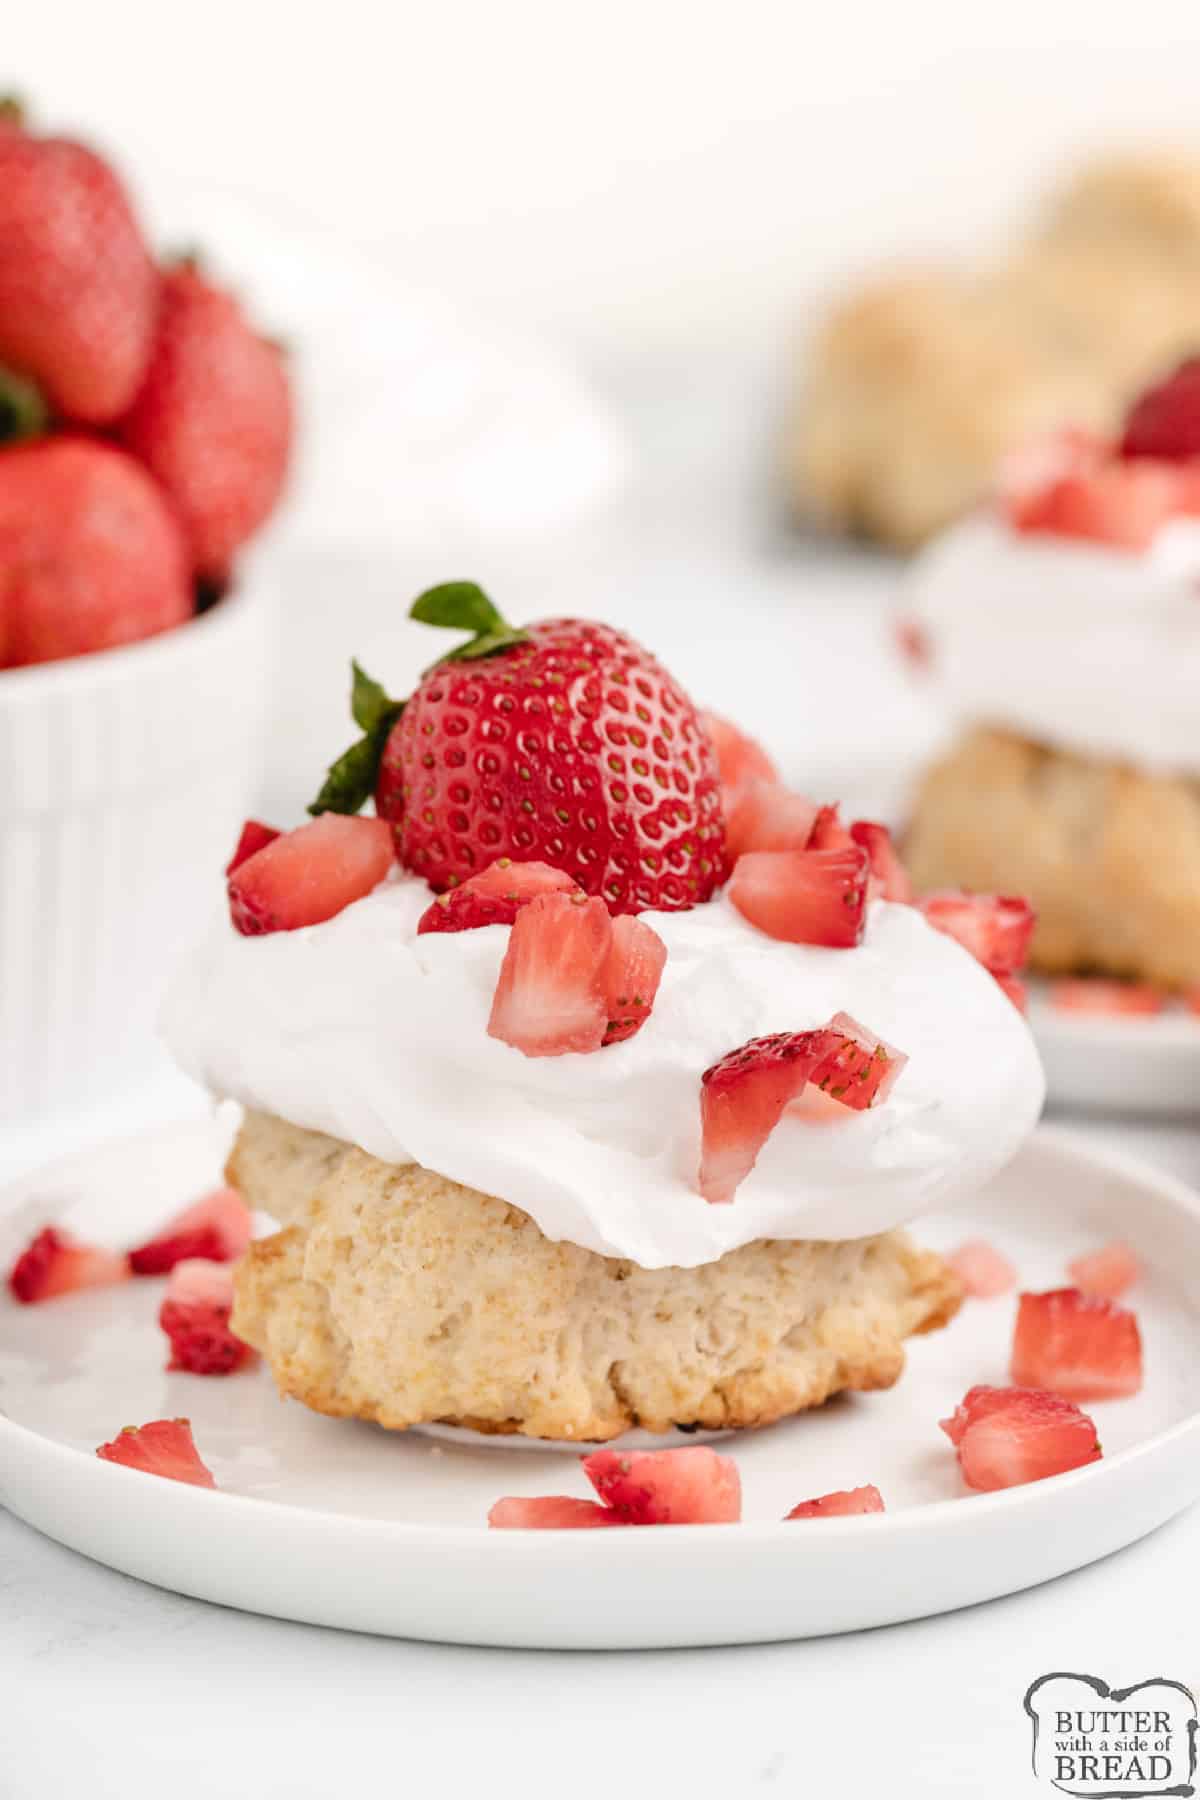 Mini Strawberry Shortcakes are made from scratch with a few basic ingredients. Perfectly portioned dessert made with fresh strawberries and whipped cream. 